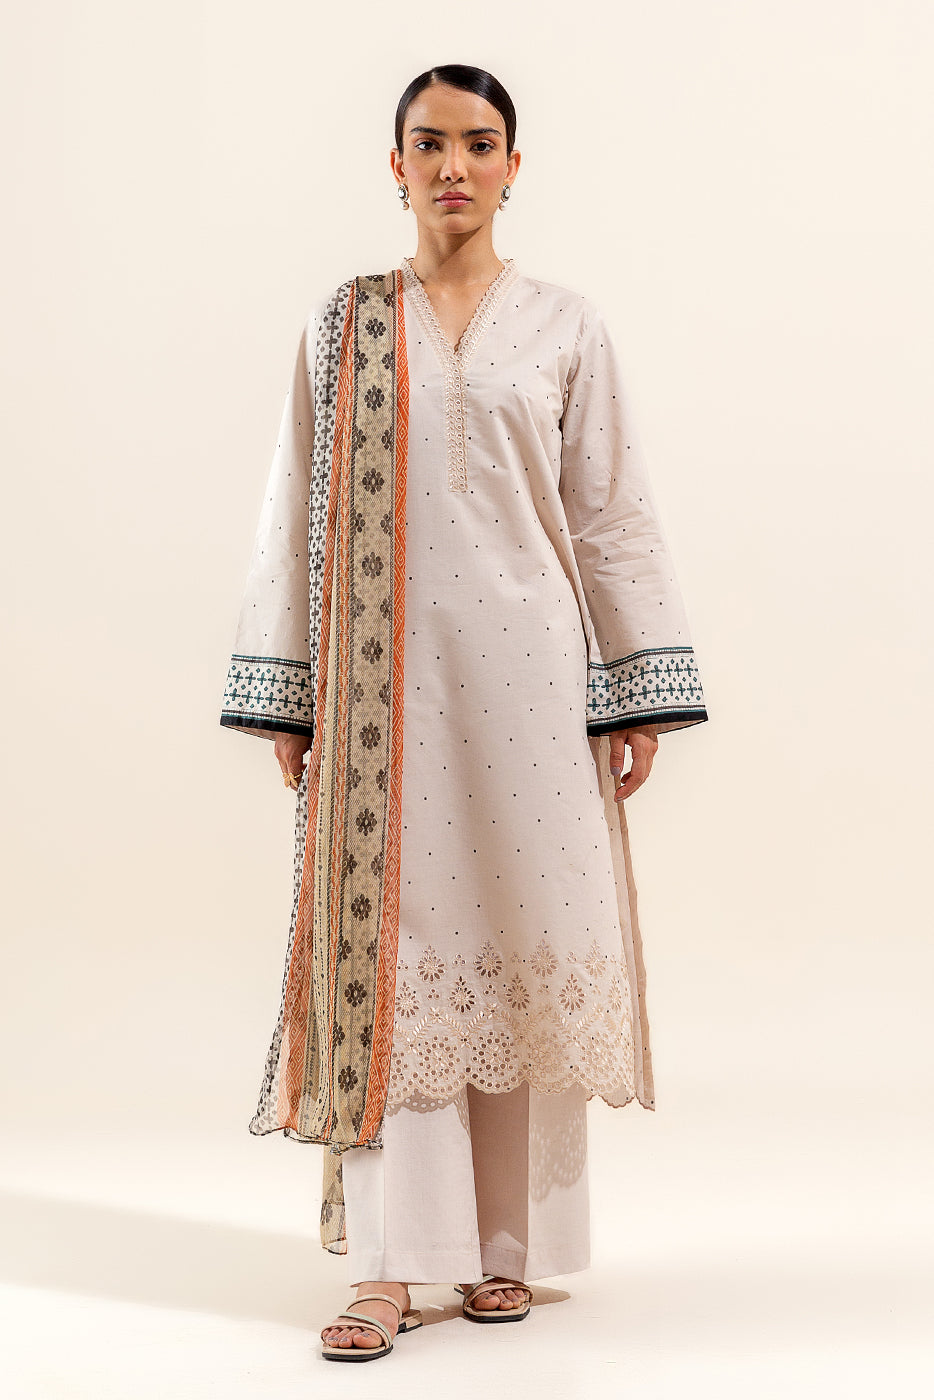 2 PIECE EMBROIDERED LAWN SUIT-MOCHA FROST (UNSTITCHED)